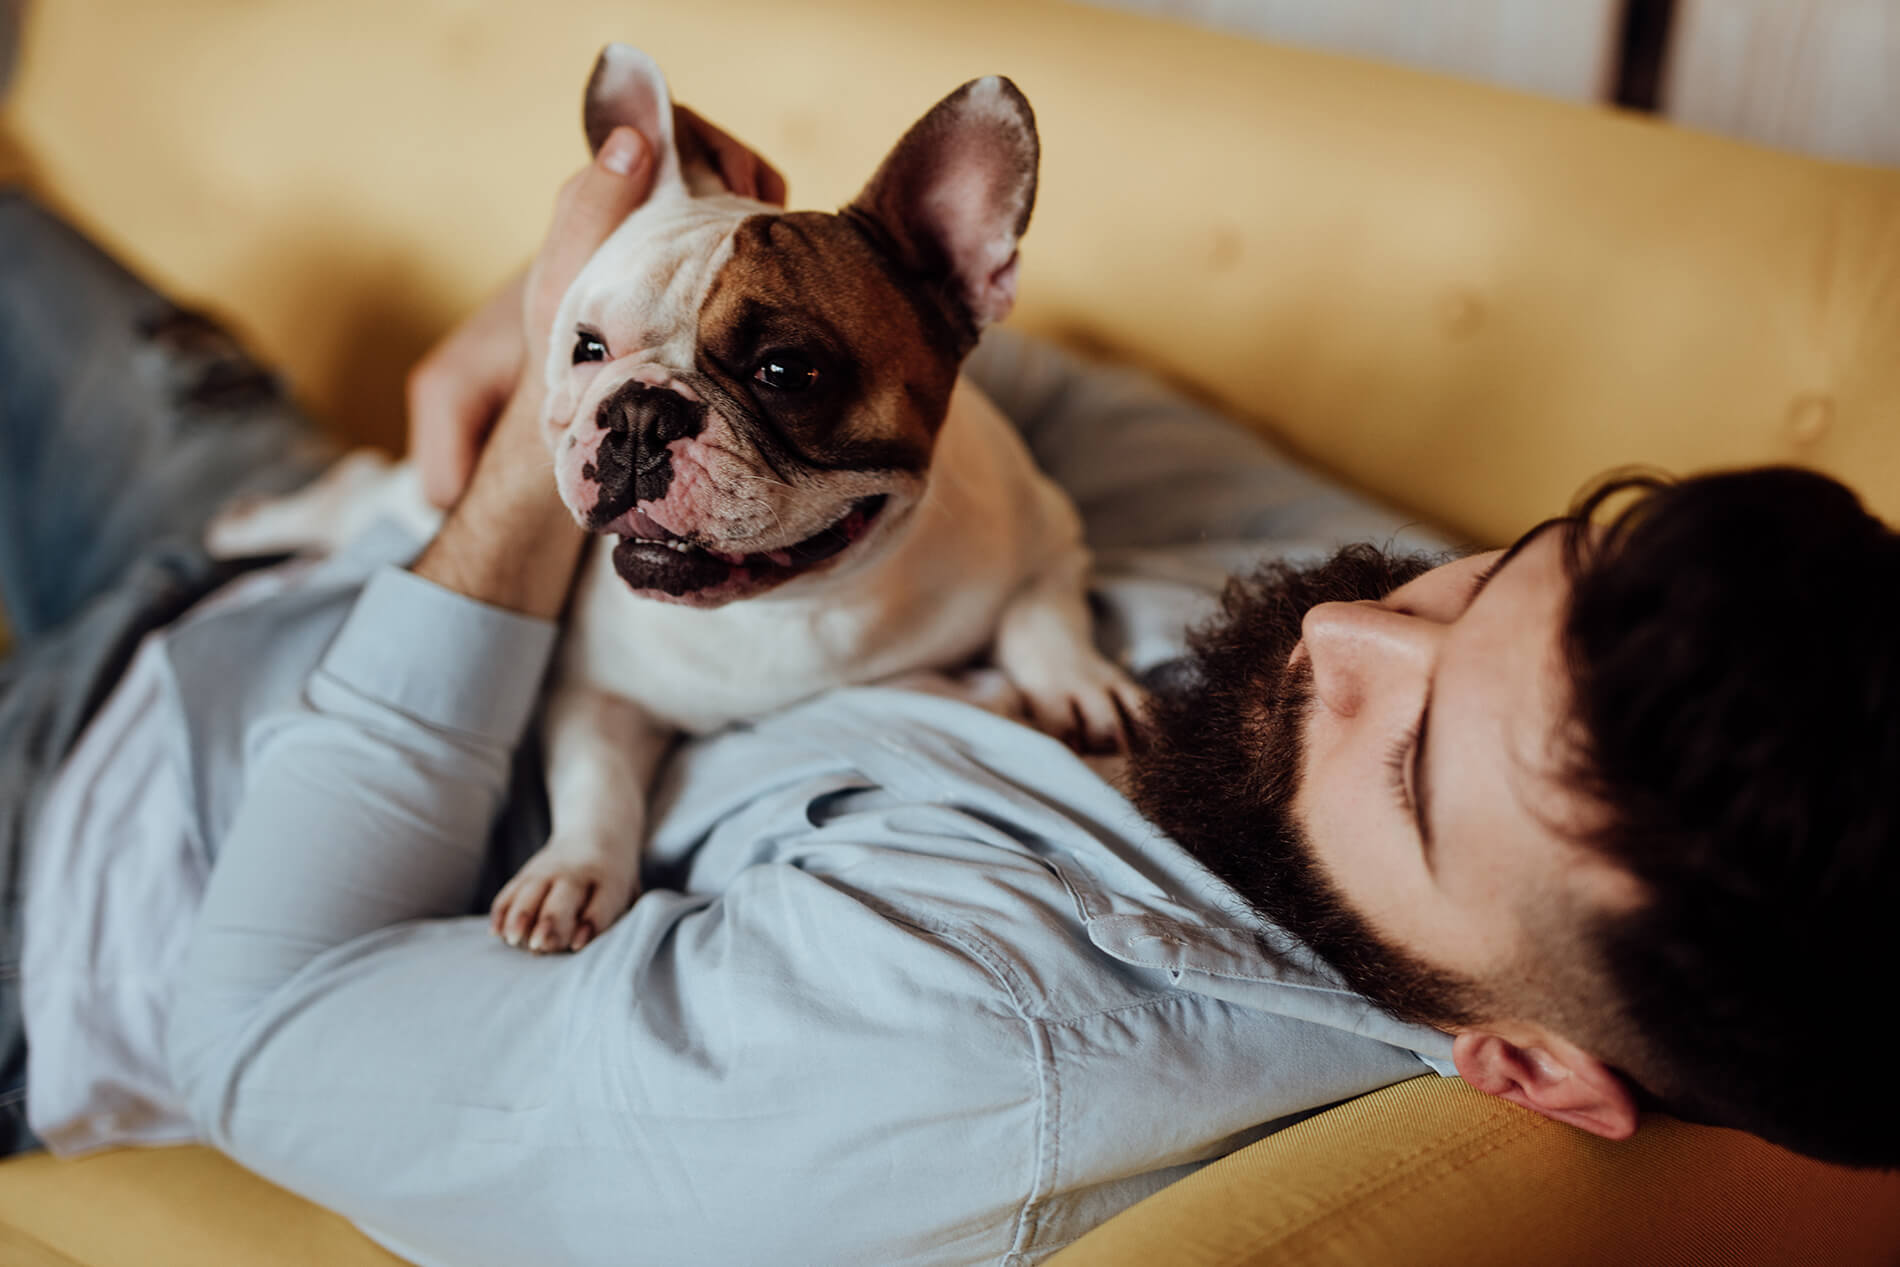 man on couch with dog